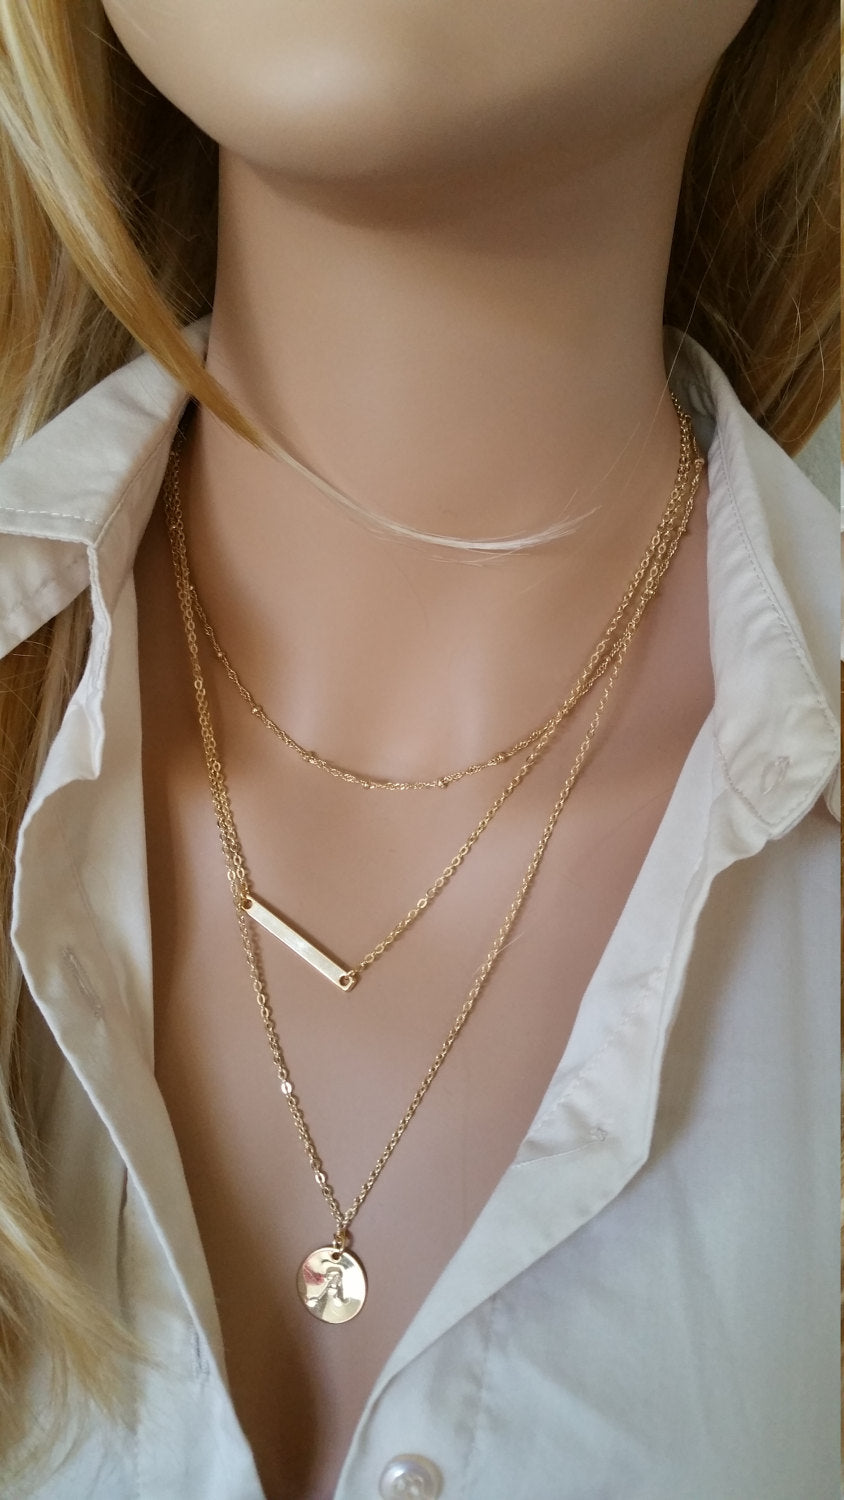 Buy Dainty Layered Set Gold and Sterling Silver Layered Necklace Initial Necklace  Personalized Jewelry Dainty Layered Necklaces B080 Online in India - Etsy